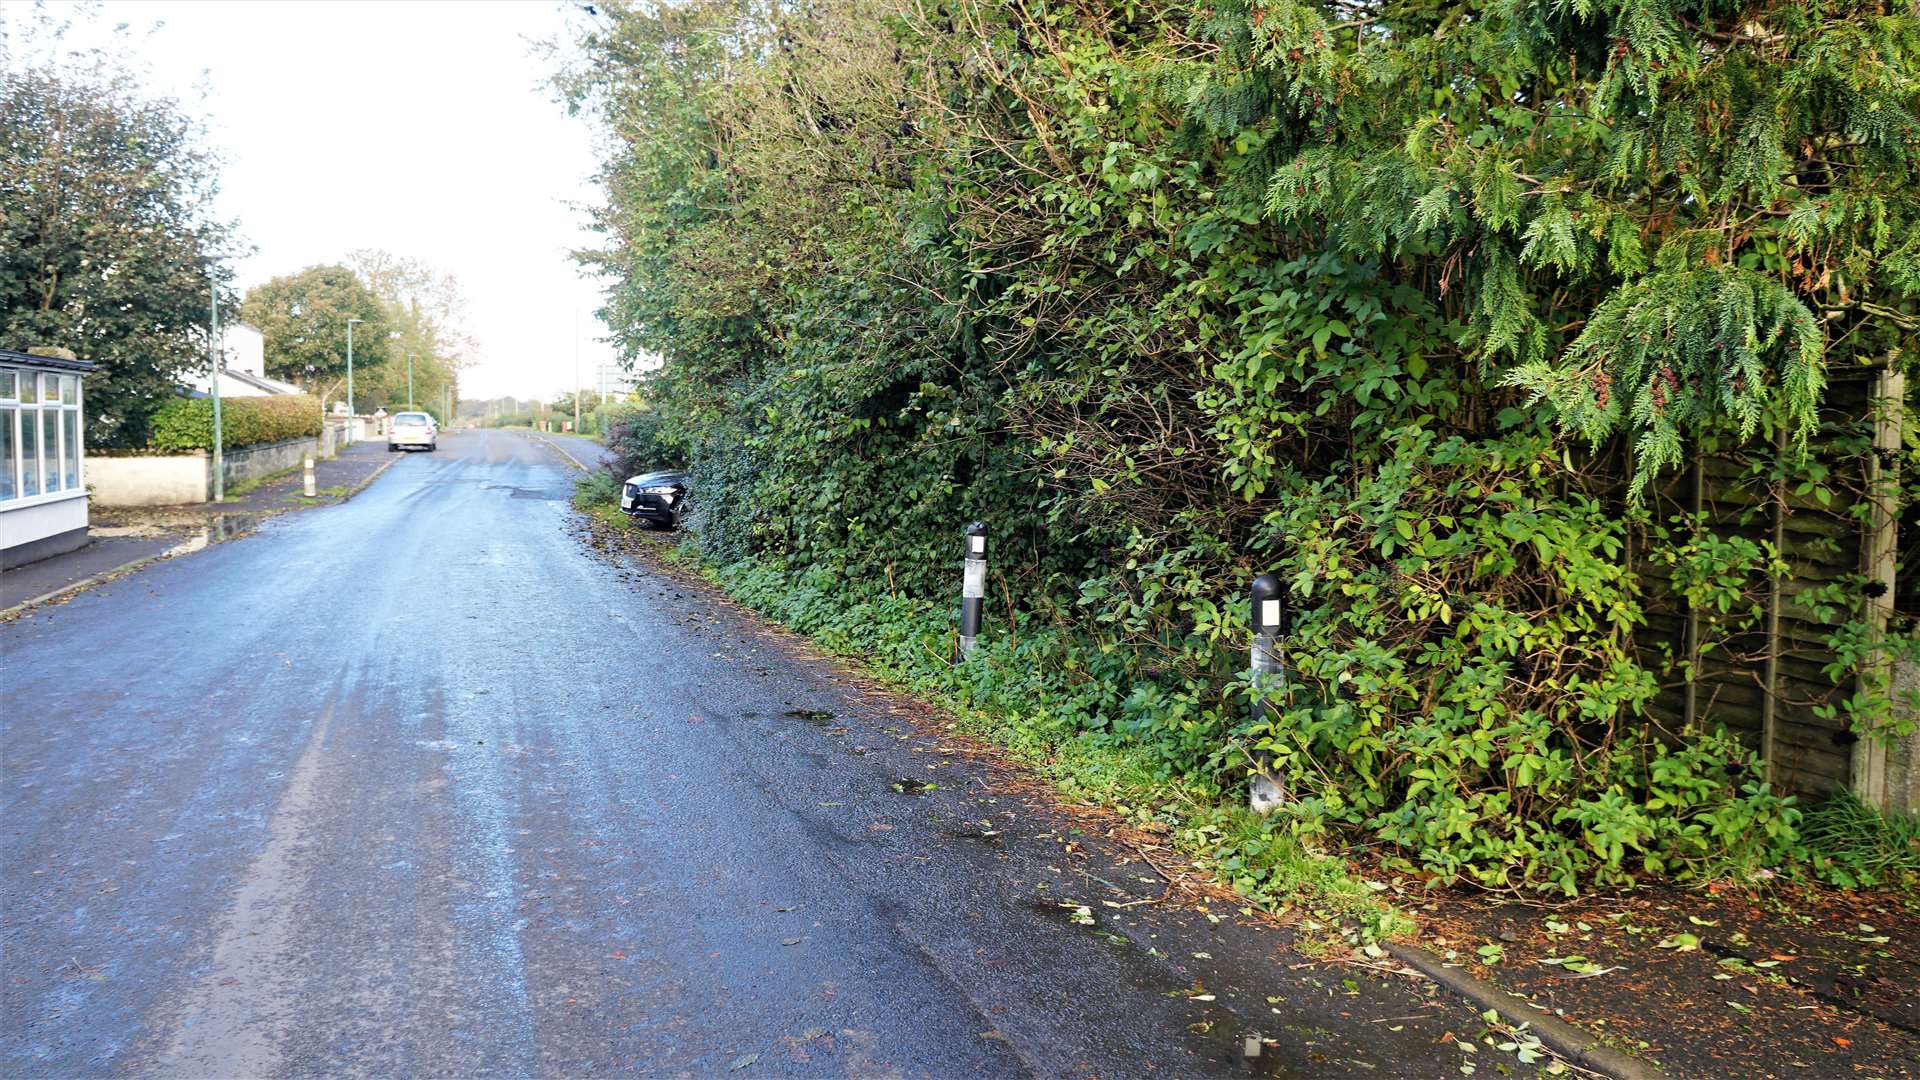 This area of pavement beside the Watten Toll House is inaccessible for pedestrians due to the growth of trees, weeds and shrubs. Picture: DGS